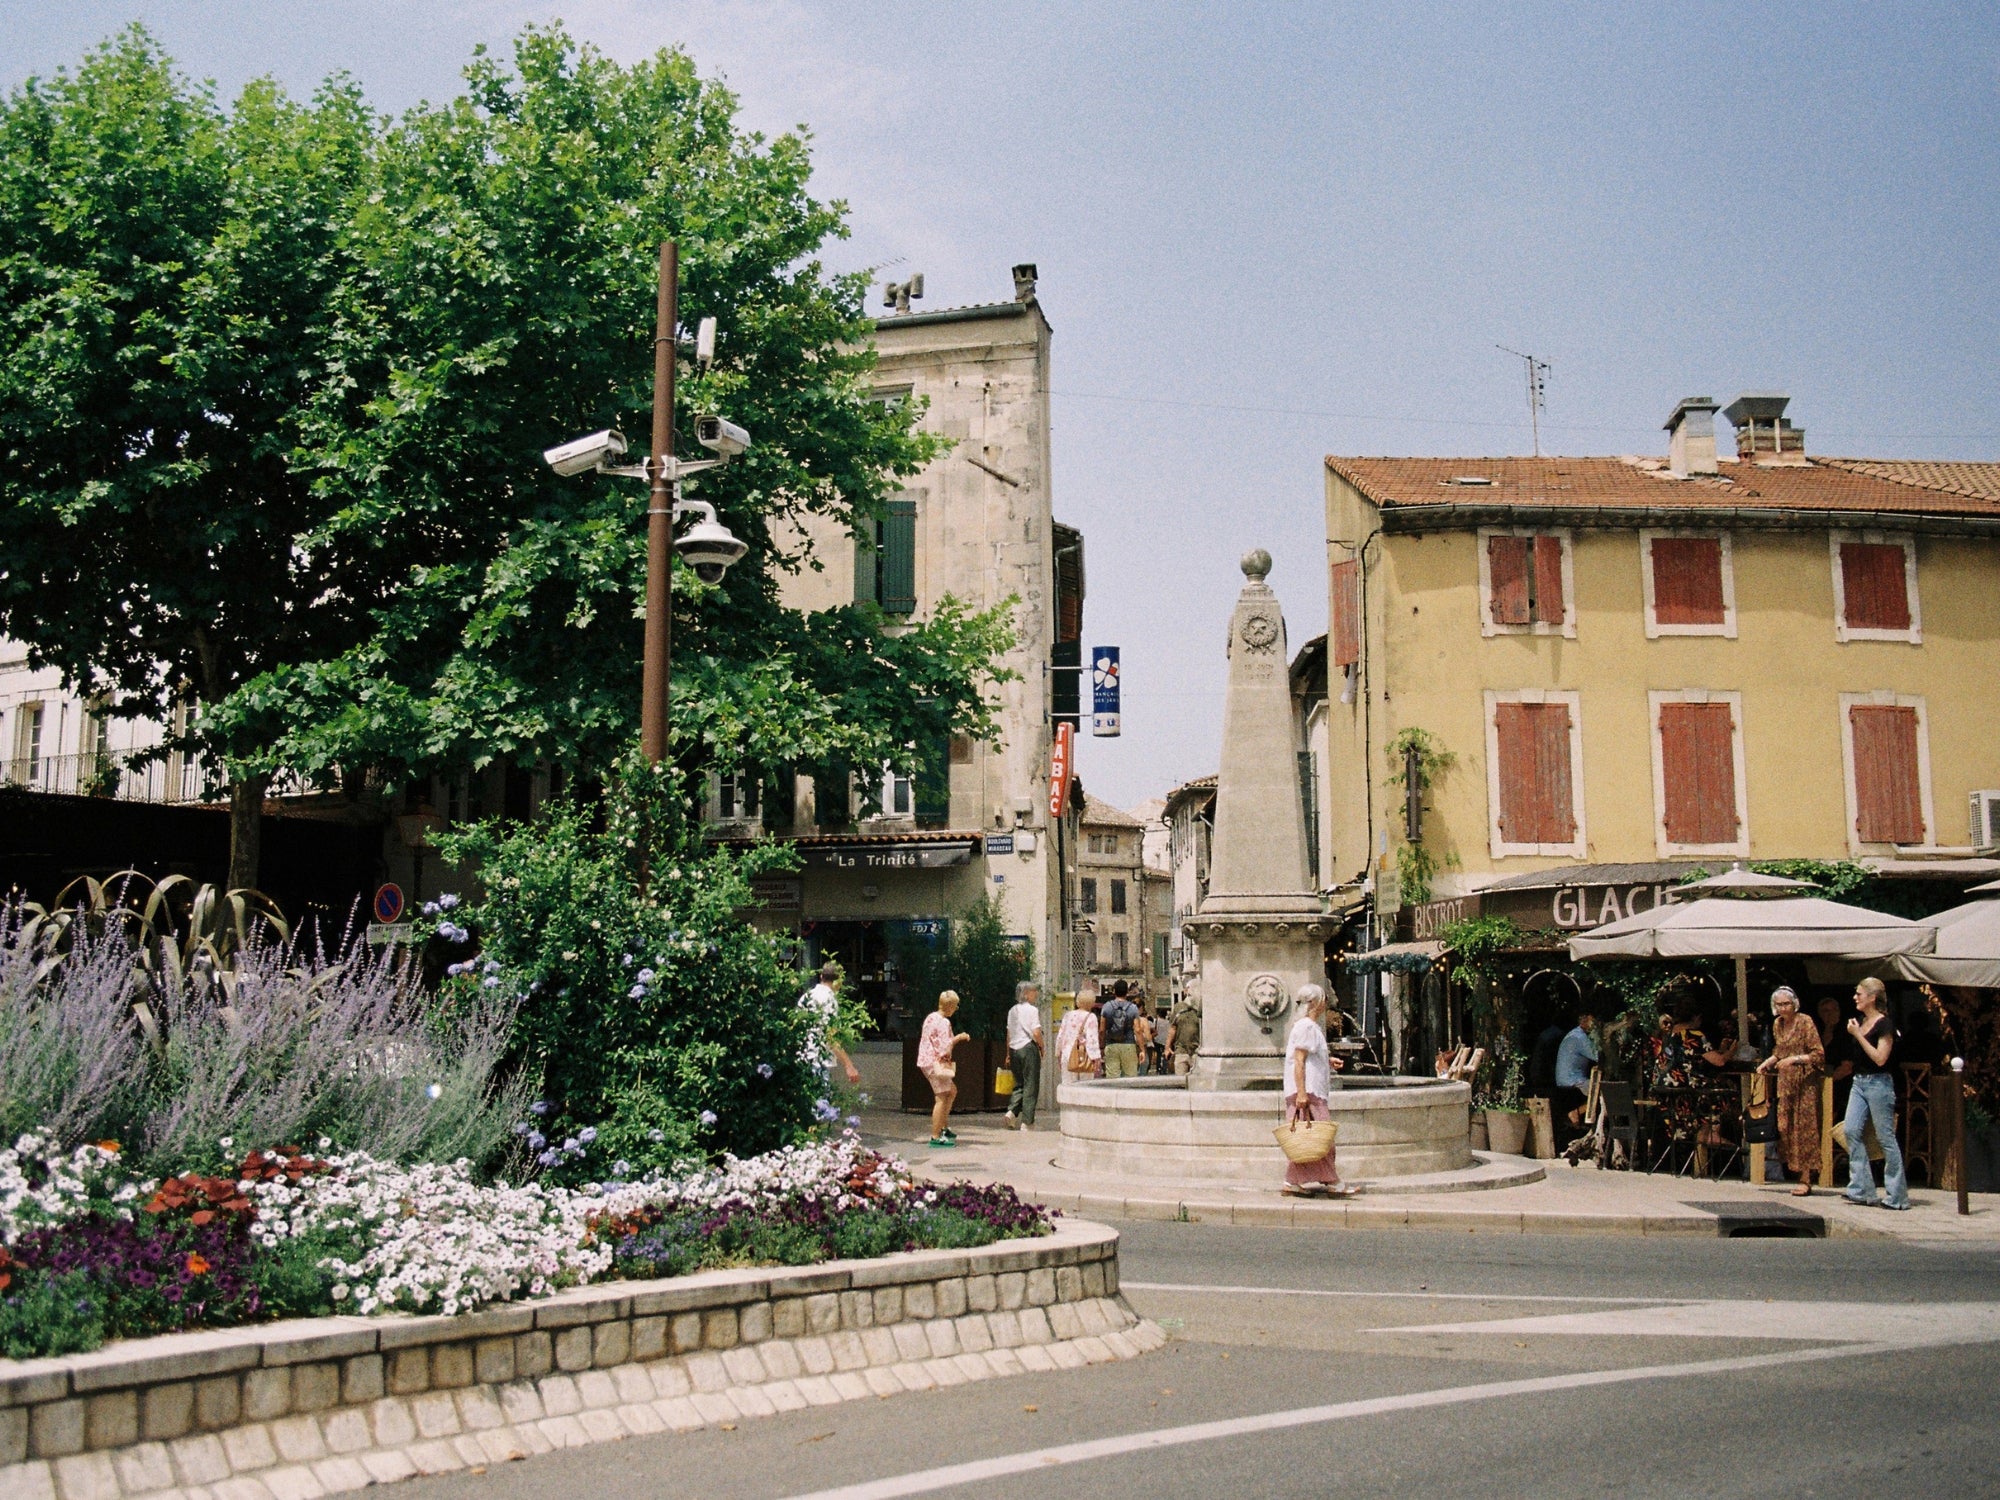 Late morning in Saint-Rémy-de-Provence, on a market day